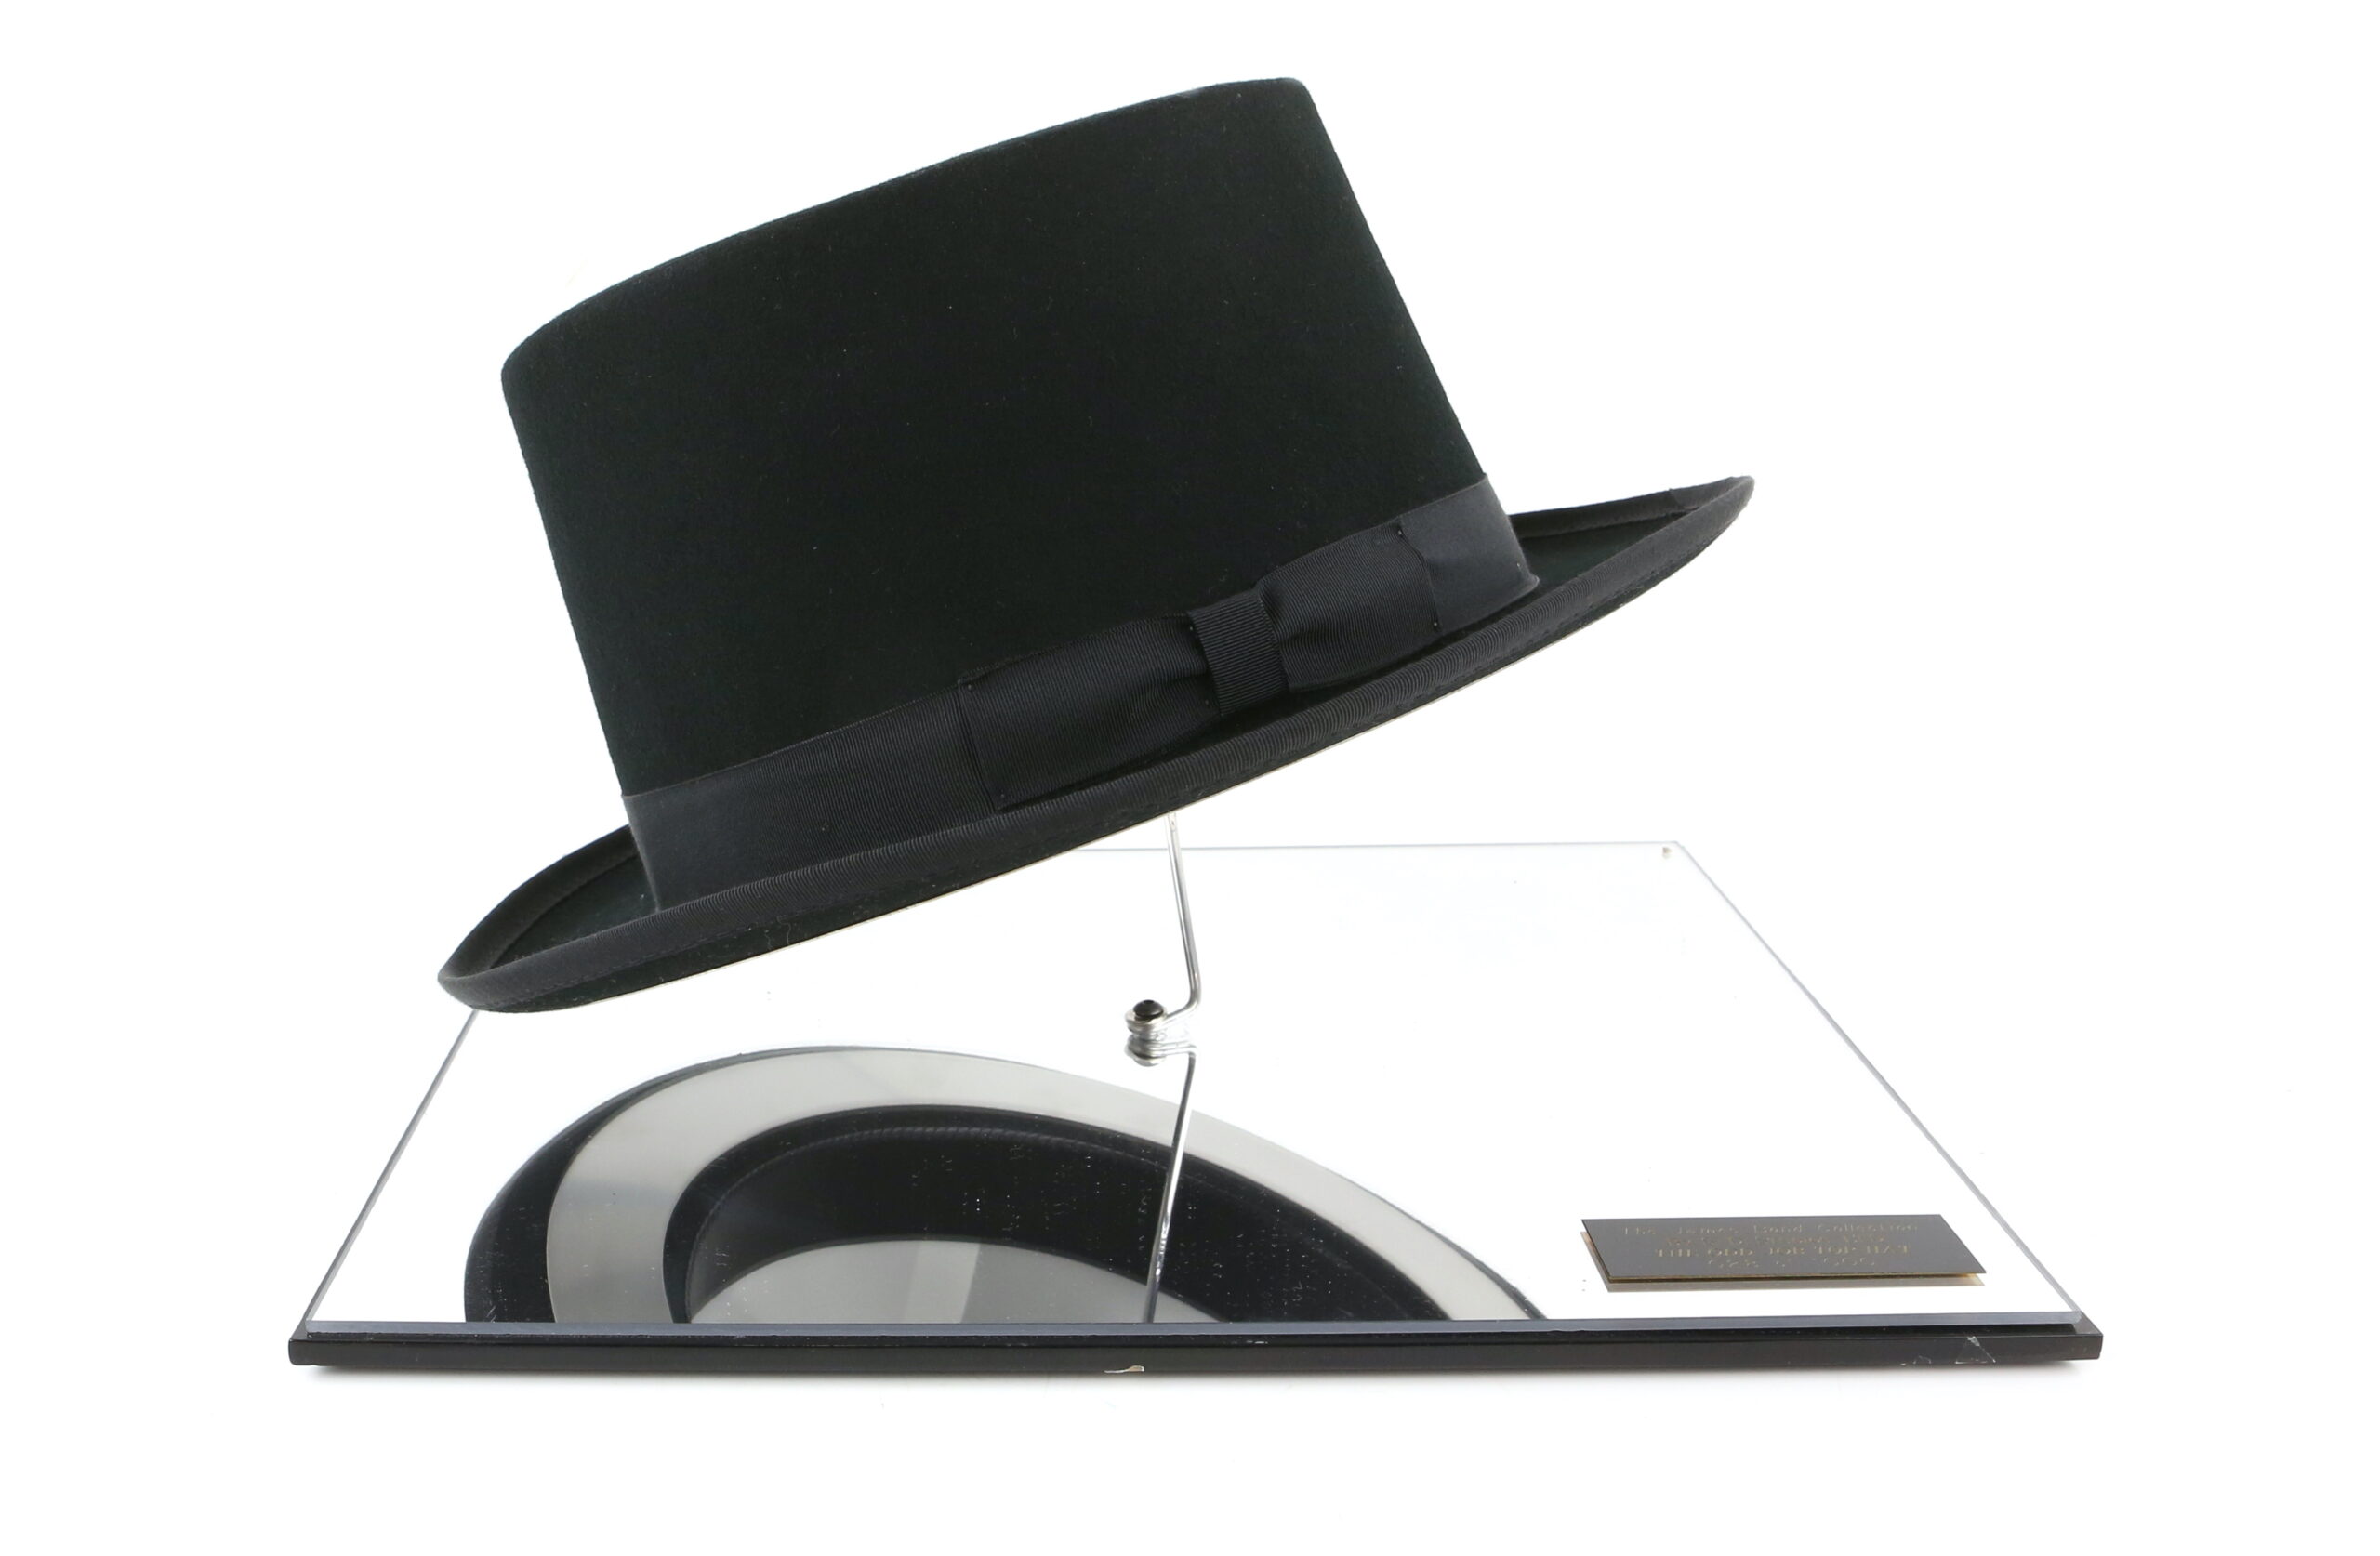 replica top hat as worn by Oddjob in James Bond film Goldfinger